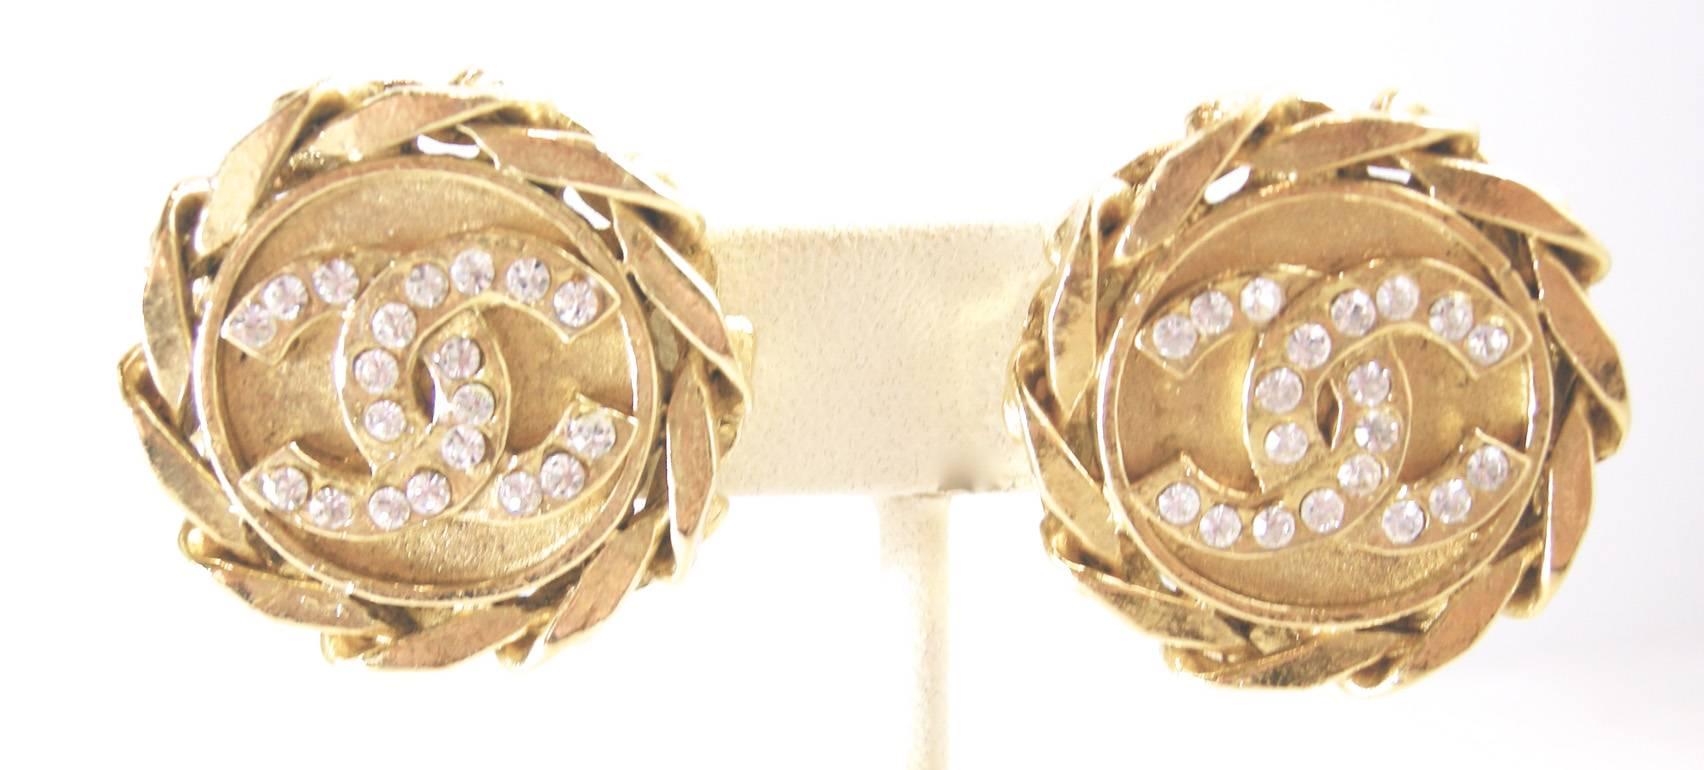 These vintage signed Chanel earrings feature the famous CC logo with clear rhinestone in a gold-tone setting.  These clip earrings measure 1-1/4” in diameter and are signed “Chanel 23 Made in France” and are in excellent condition.